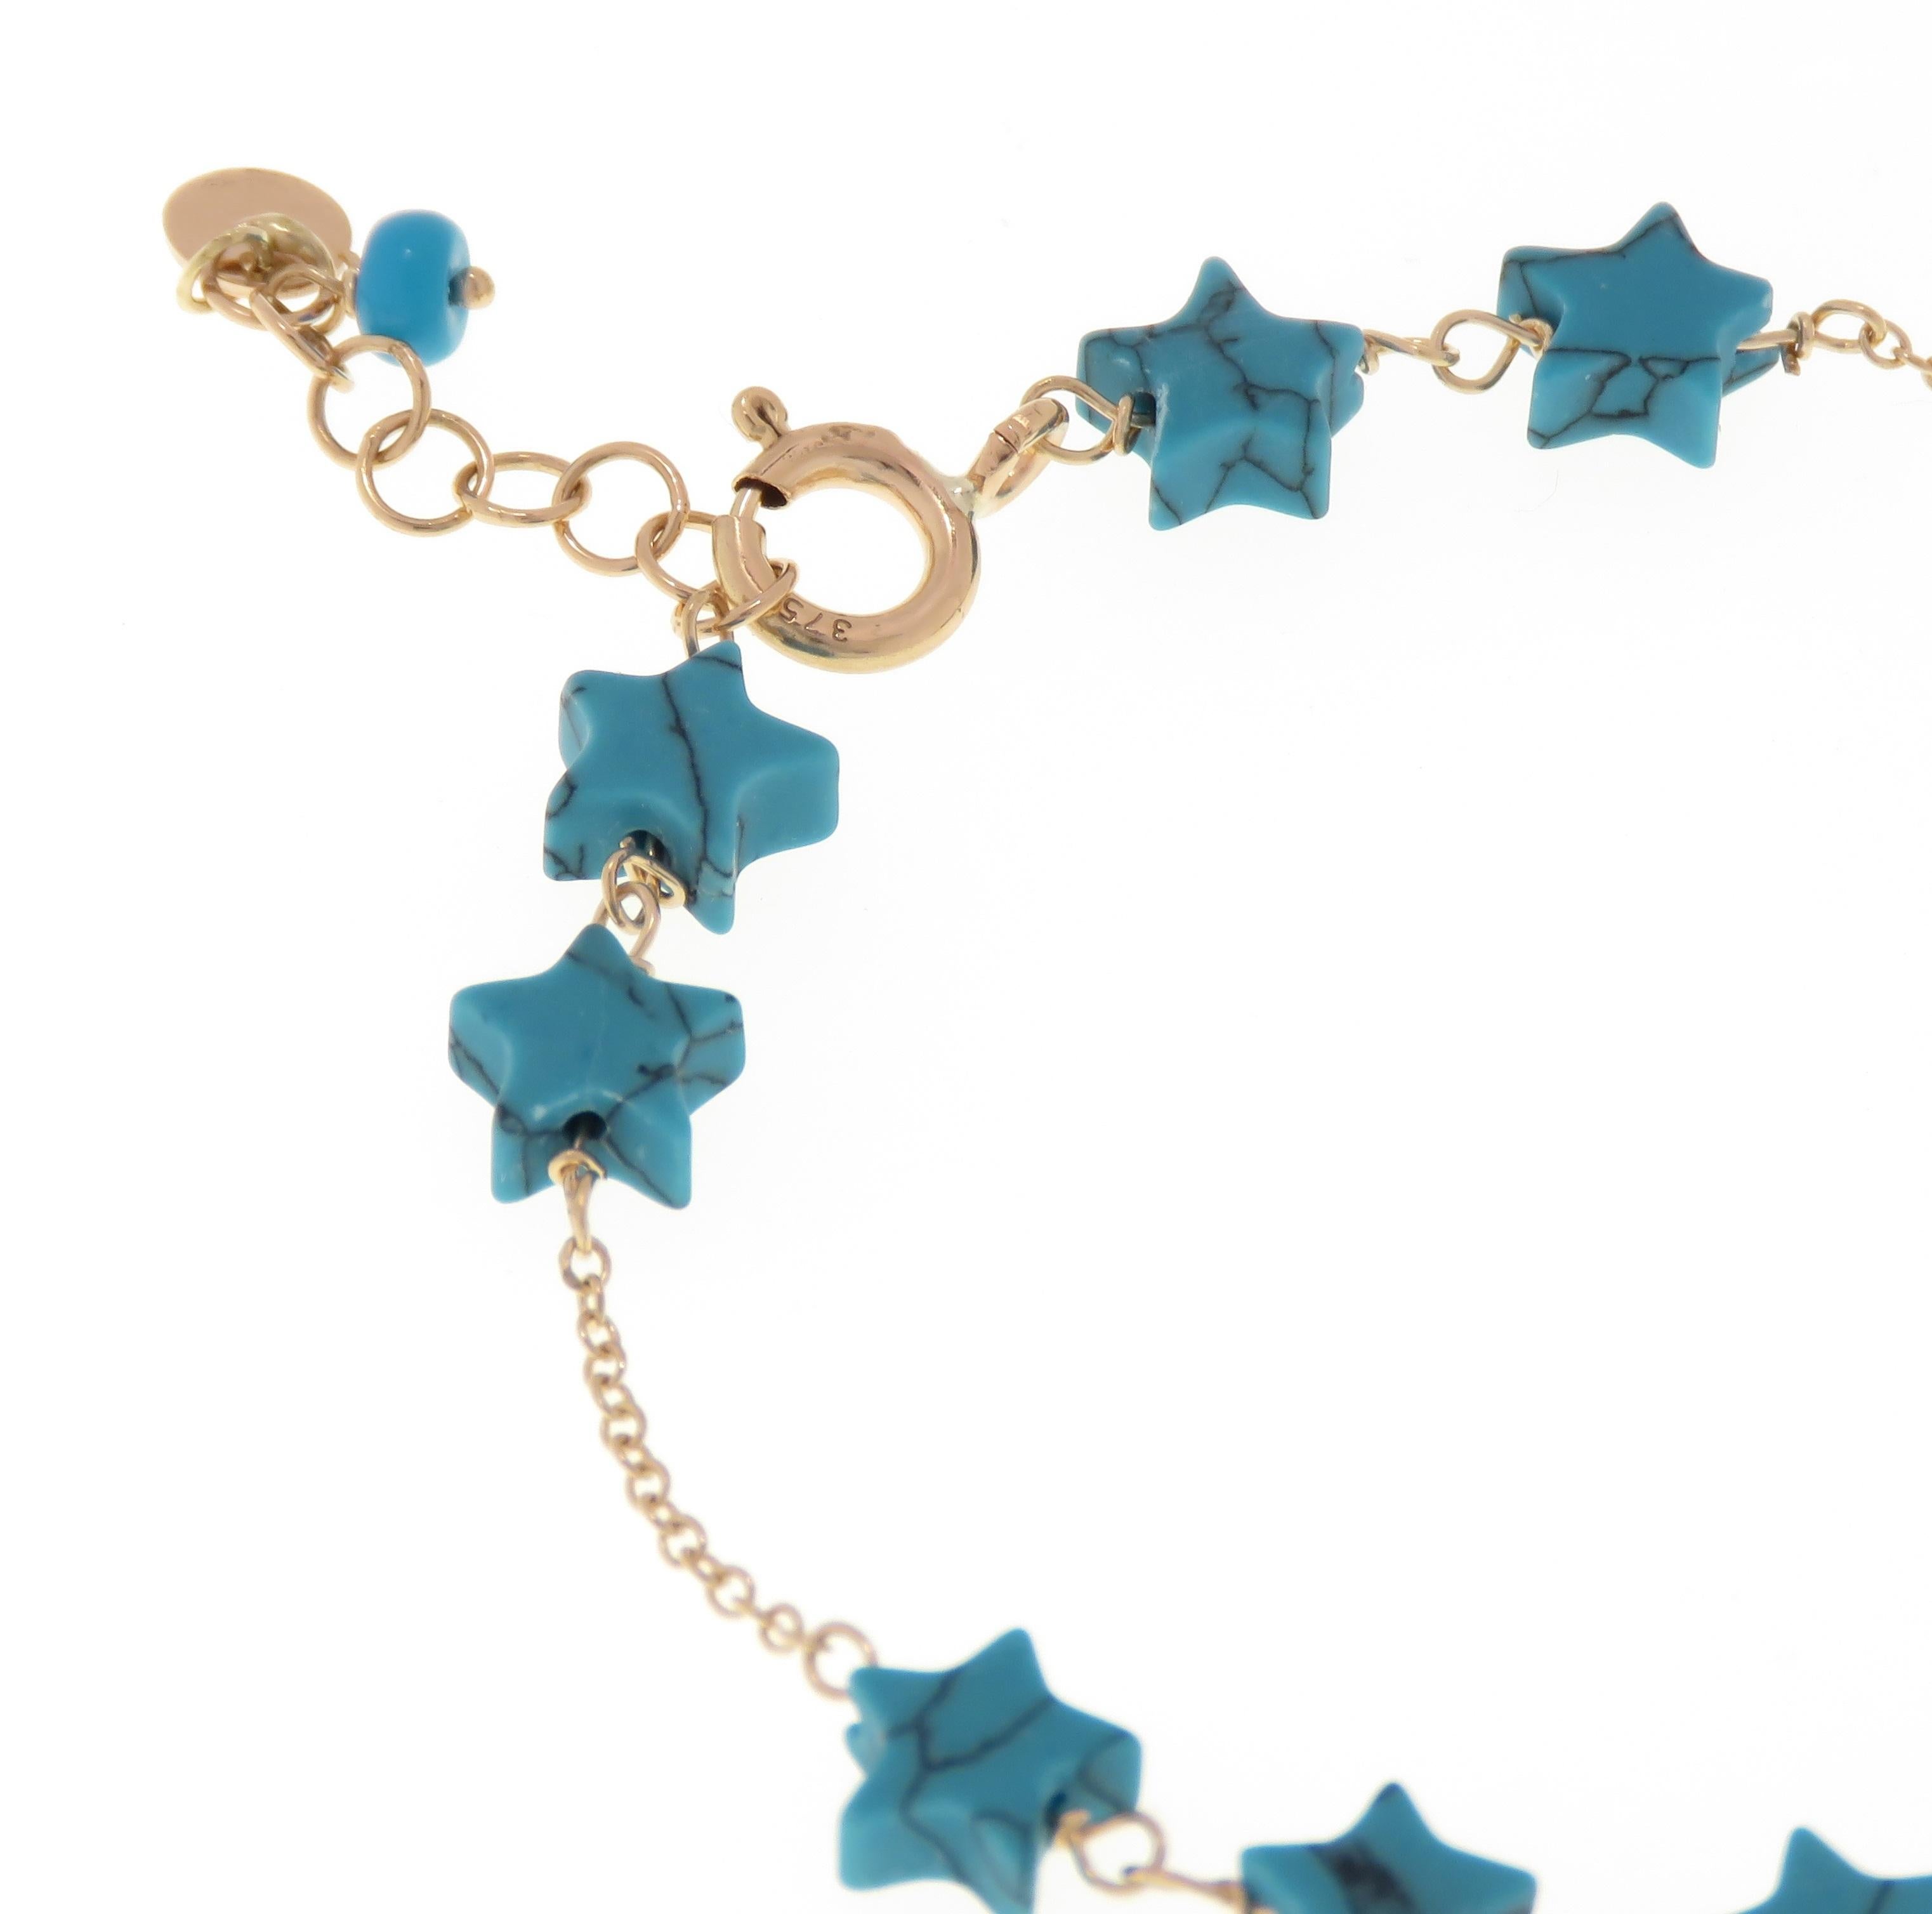 Uncut Blue Turquoise Stars 9 Karat Rose Gold Star Charm Bracelet Handcrafted in Italy For Sale